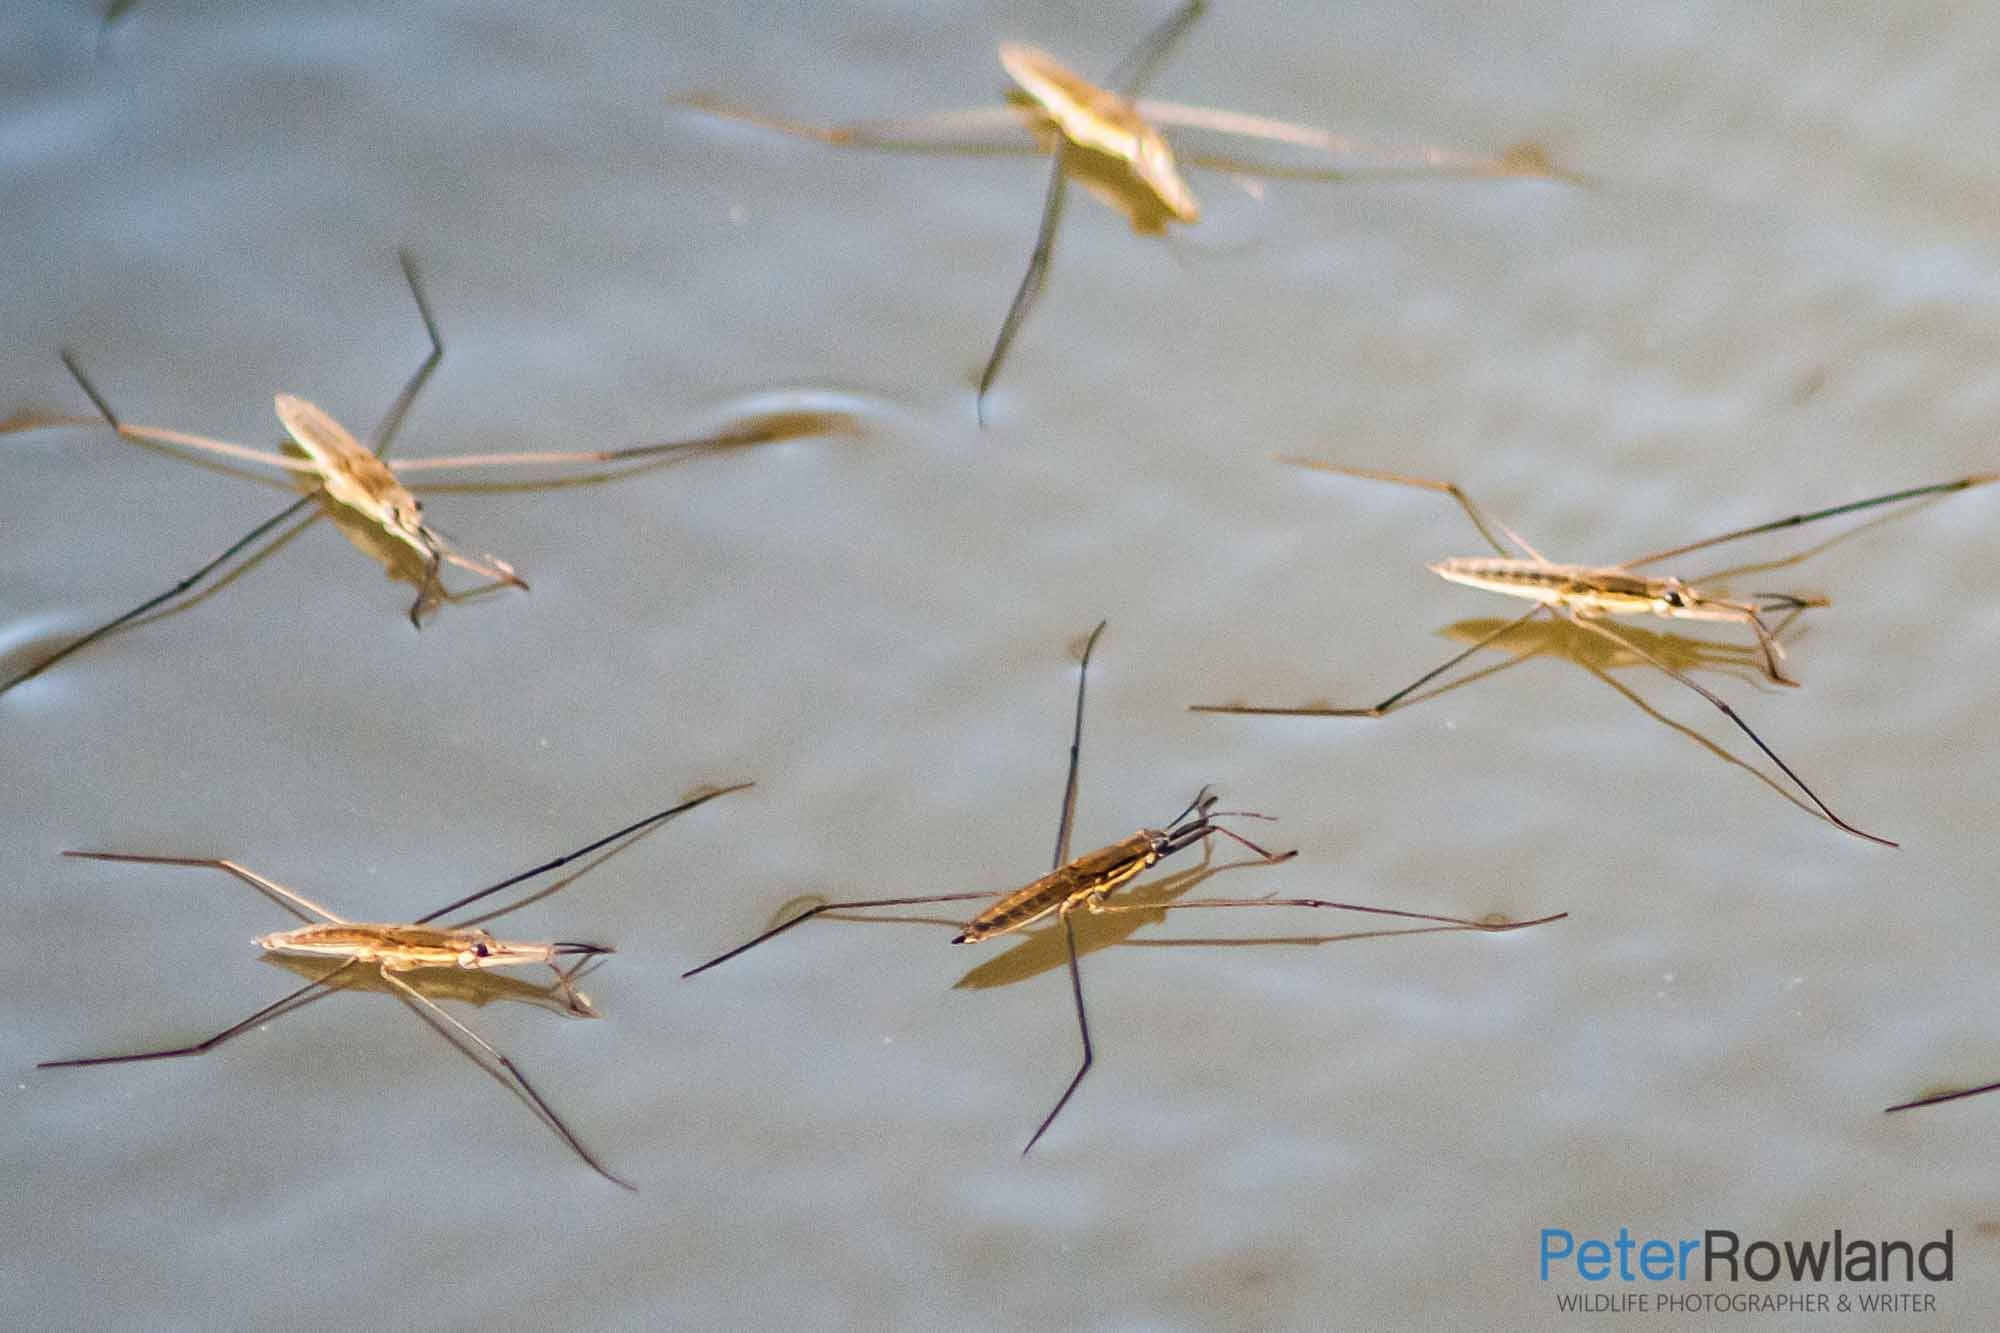 A group of Water Striders standing on the surface tension of a waterbody